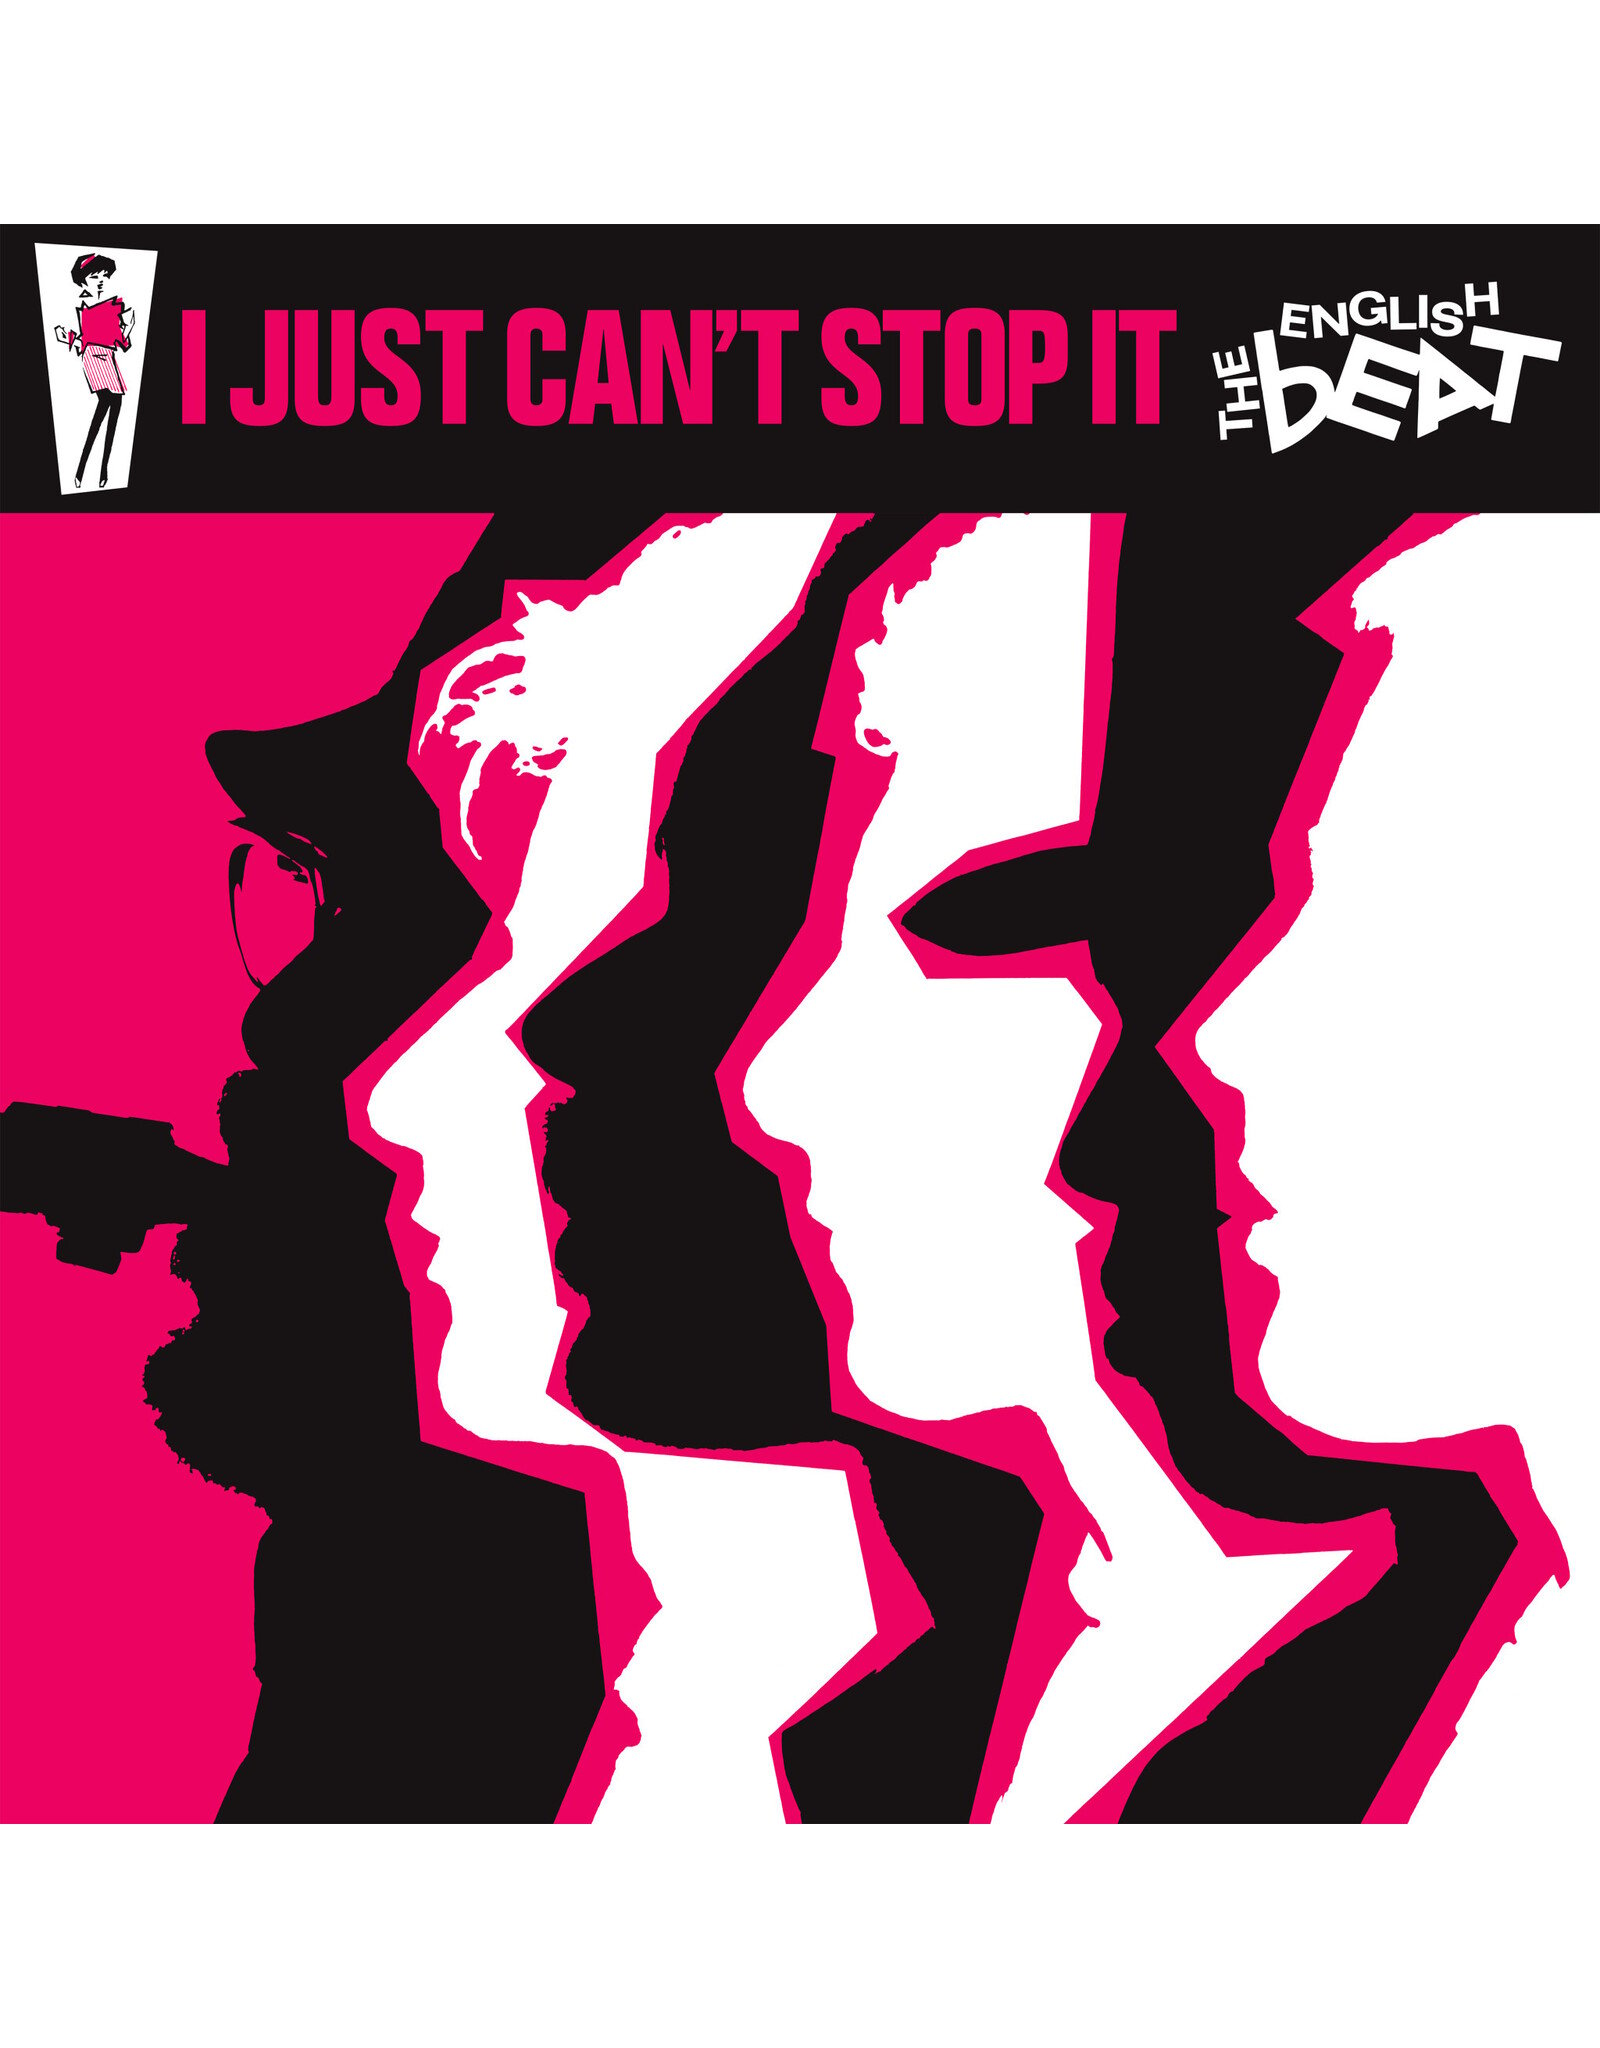 English Beat - I Just Can't Stop It (Exclusive Expanded Edition)